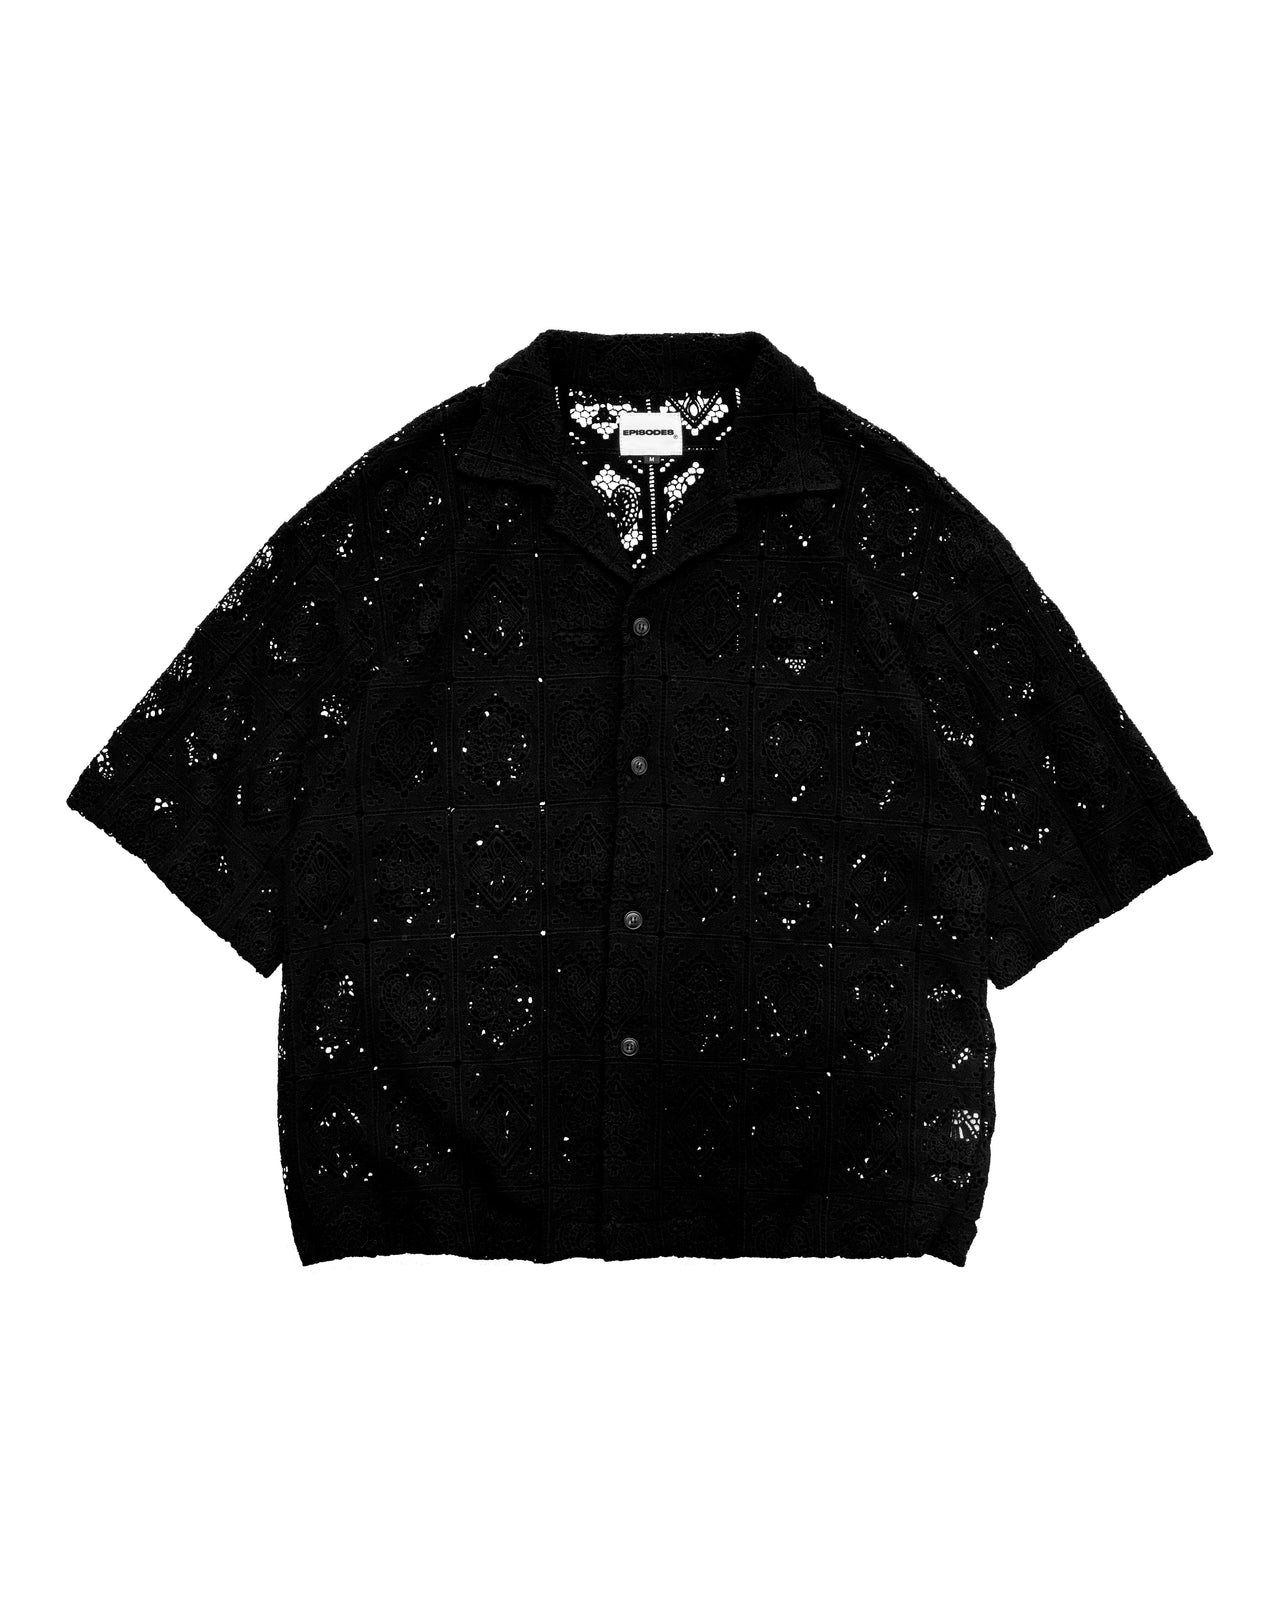 'House of Cards' Black Lace Shirt